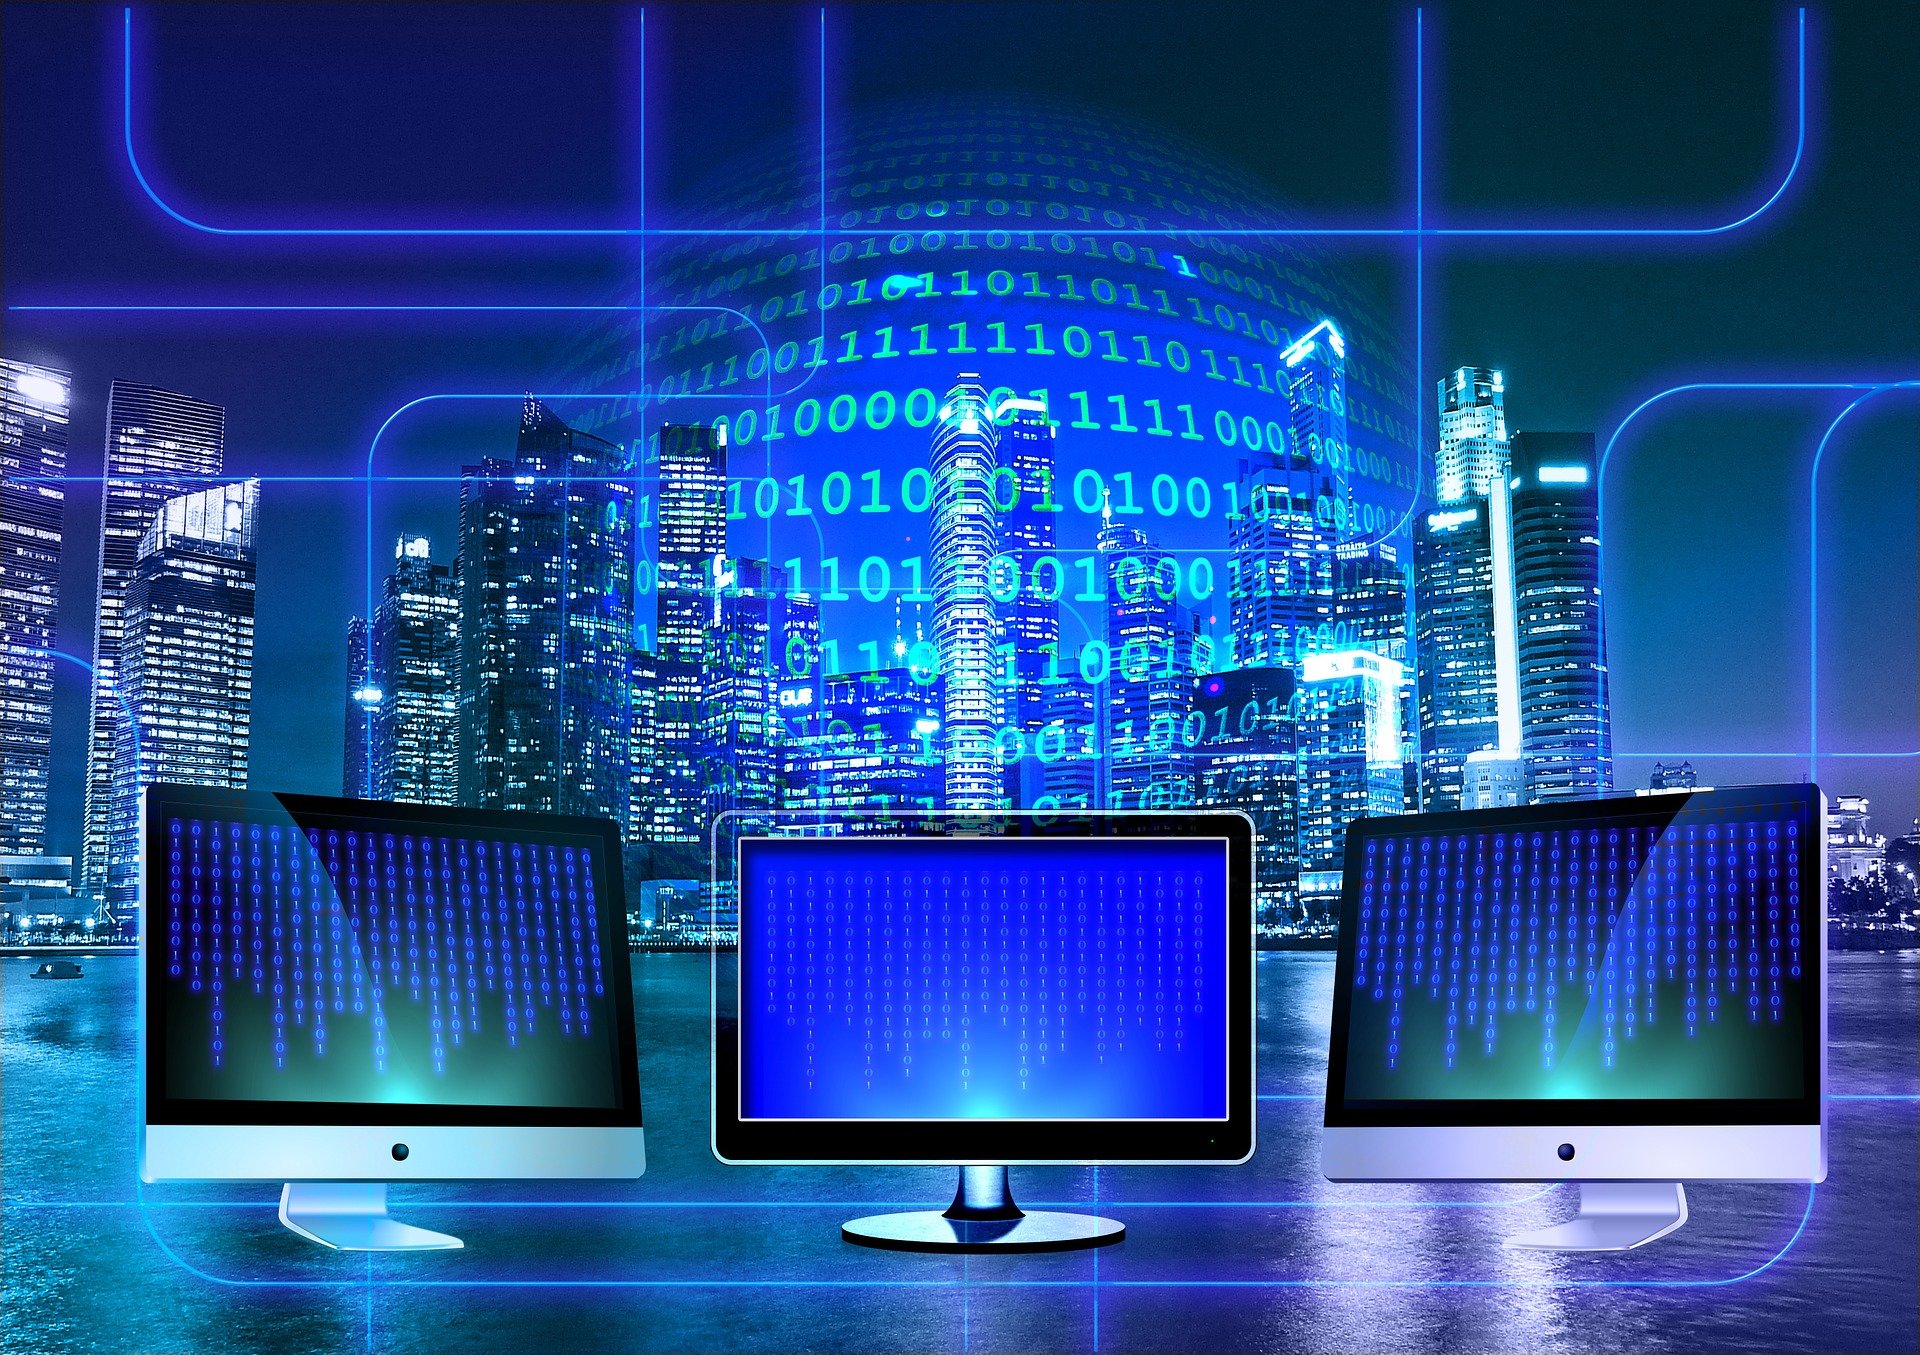 Computer monitors and binary code in front of cityscape at night; image by Geralt, via Pixabay.com.